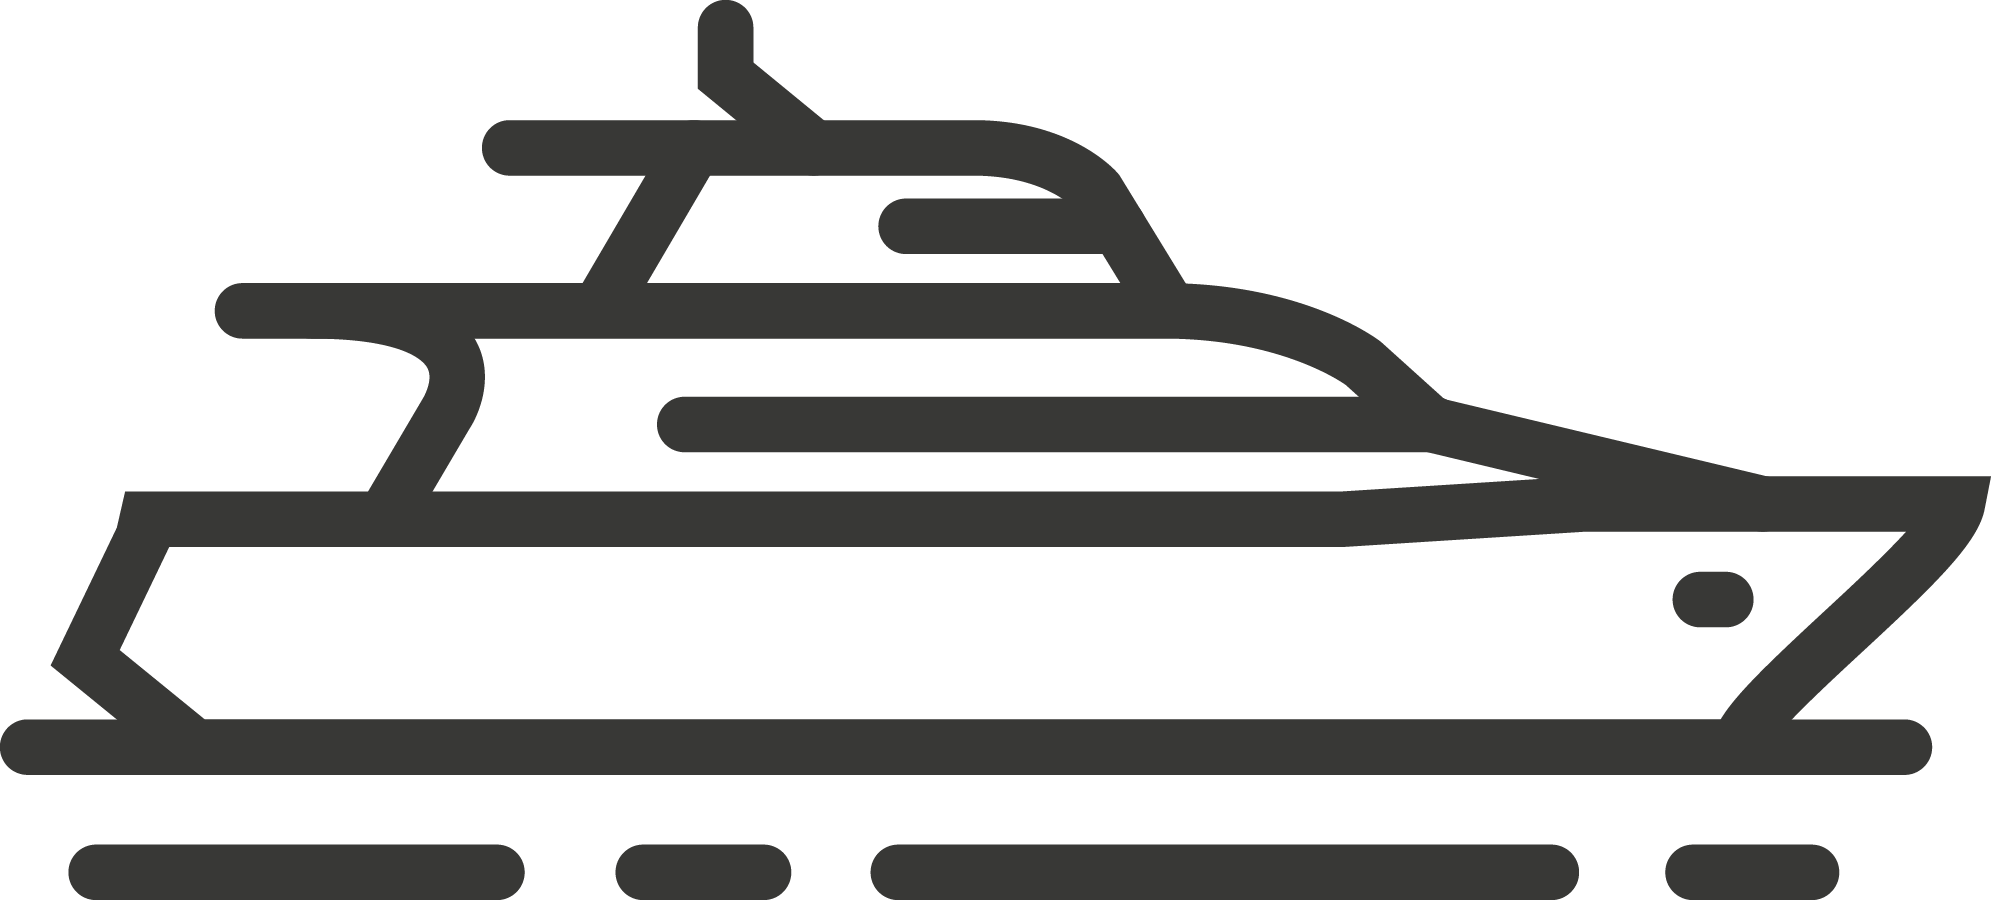 Image of luxury yacht drawn with black lines